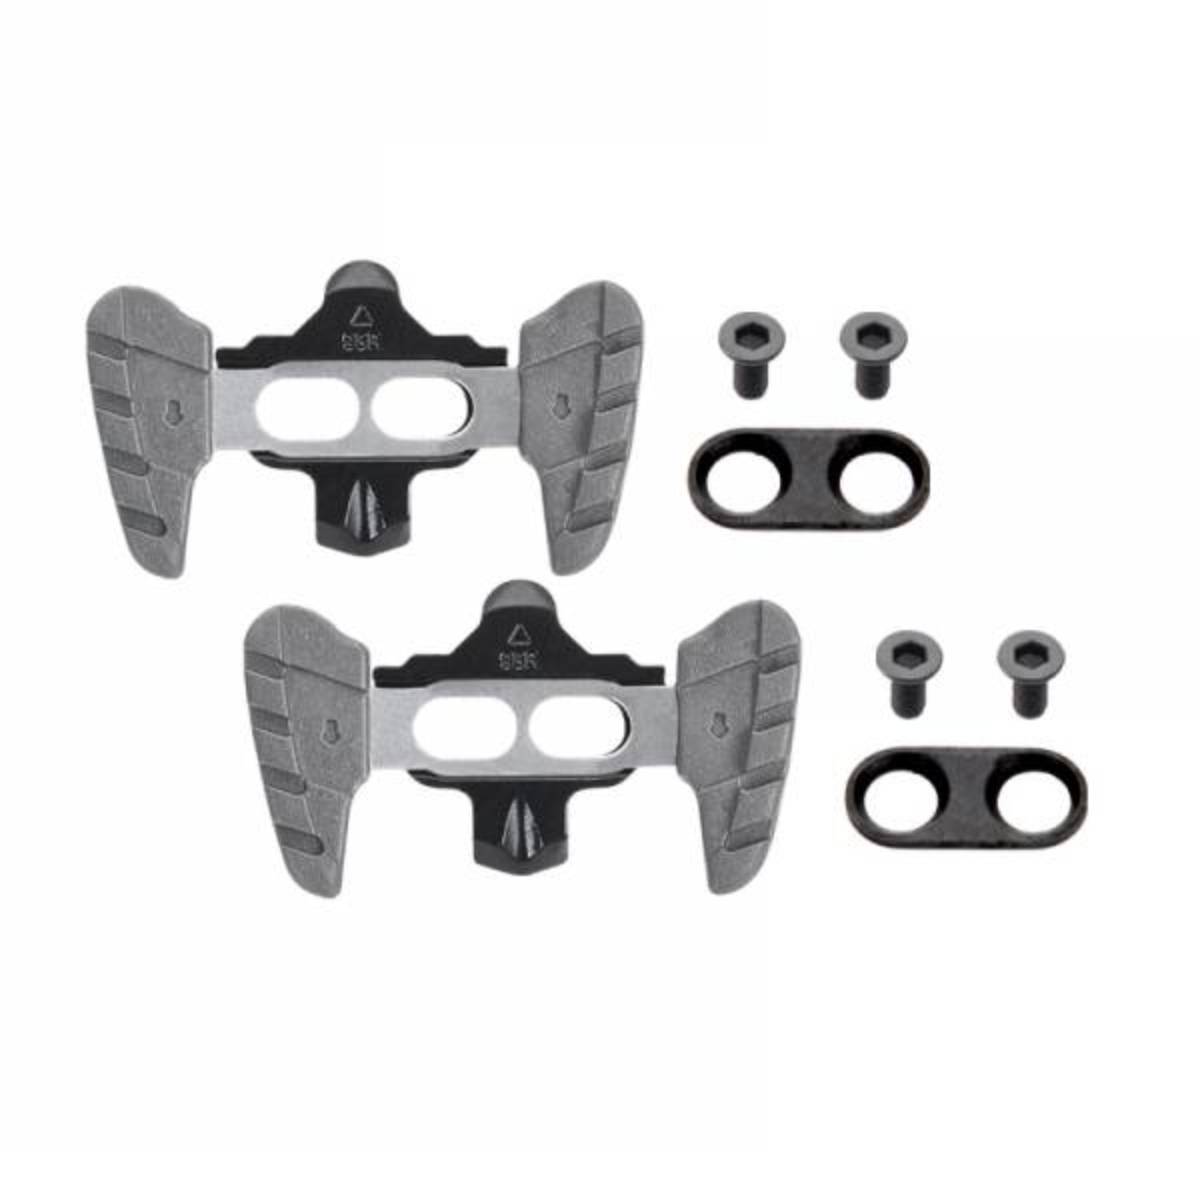 CALES WELLGO 98R SPD ROAD PEDALS WITH REQUIRED SCREWS